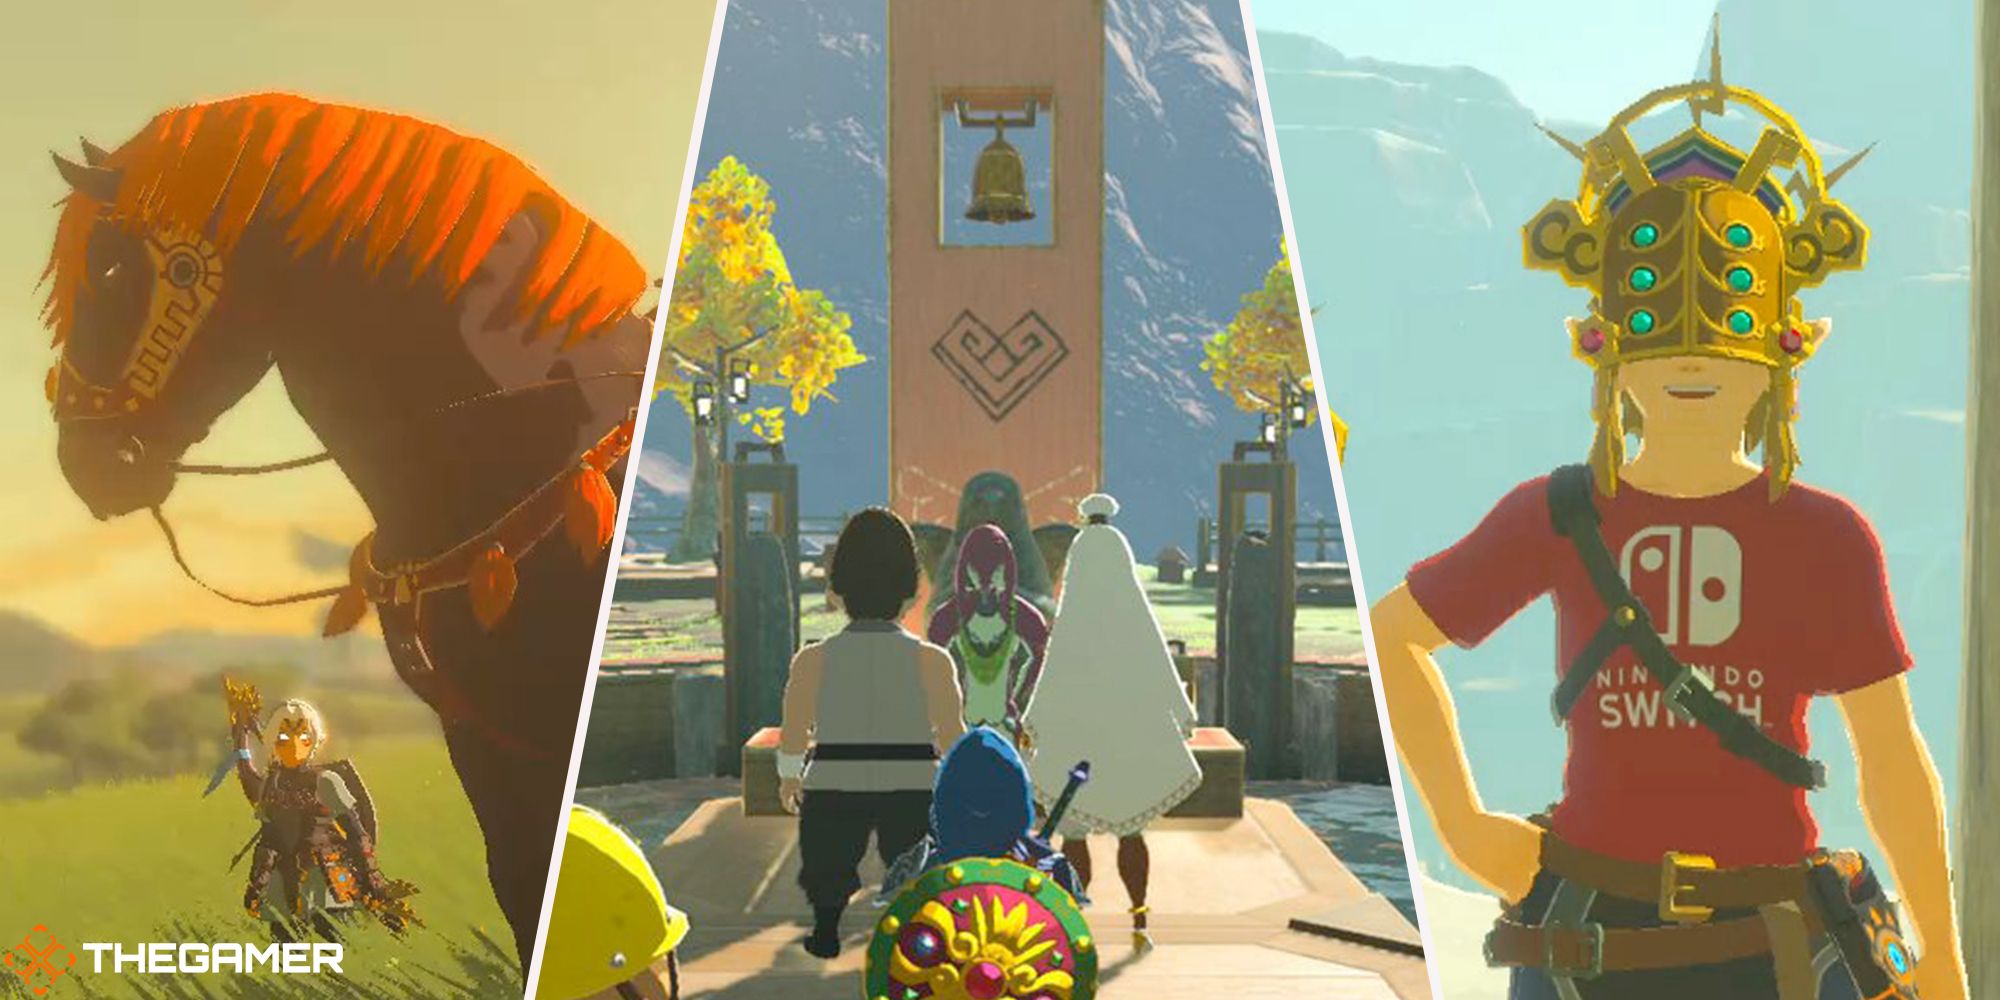 Breath of the Wild - Giant horse (left), tarry town (centre), link in the thunder helm (right) 2